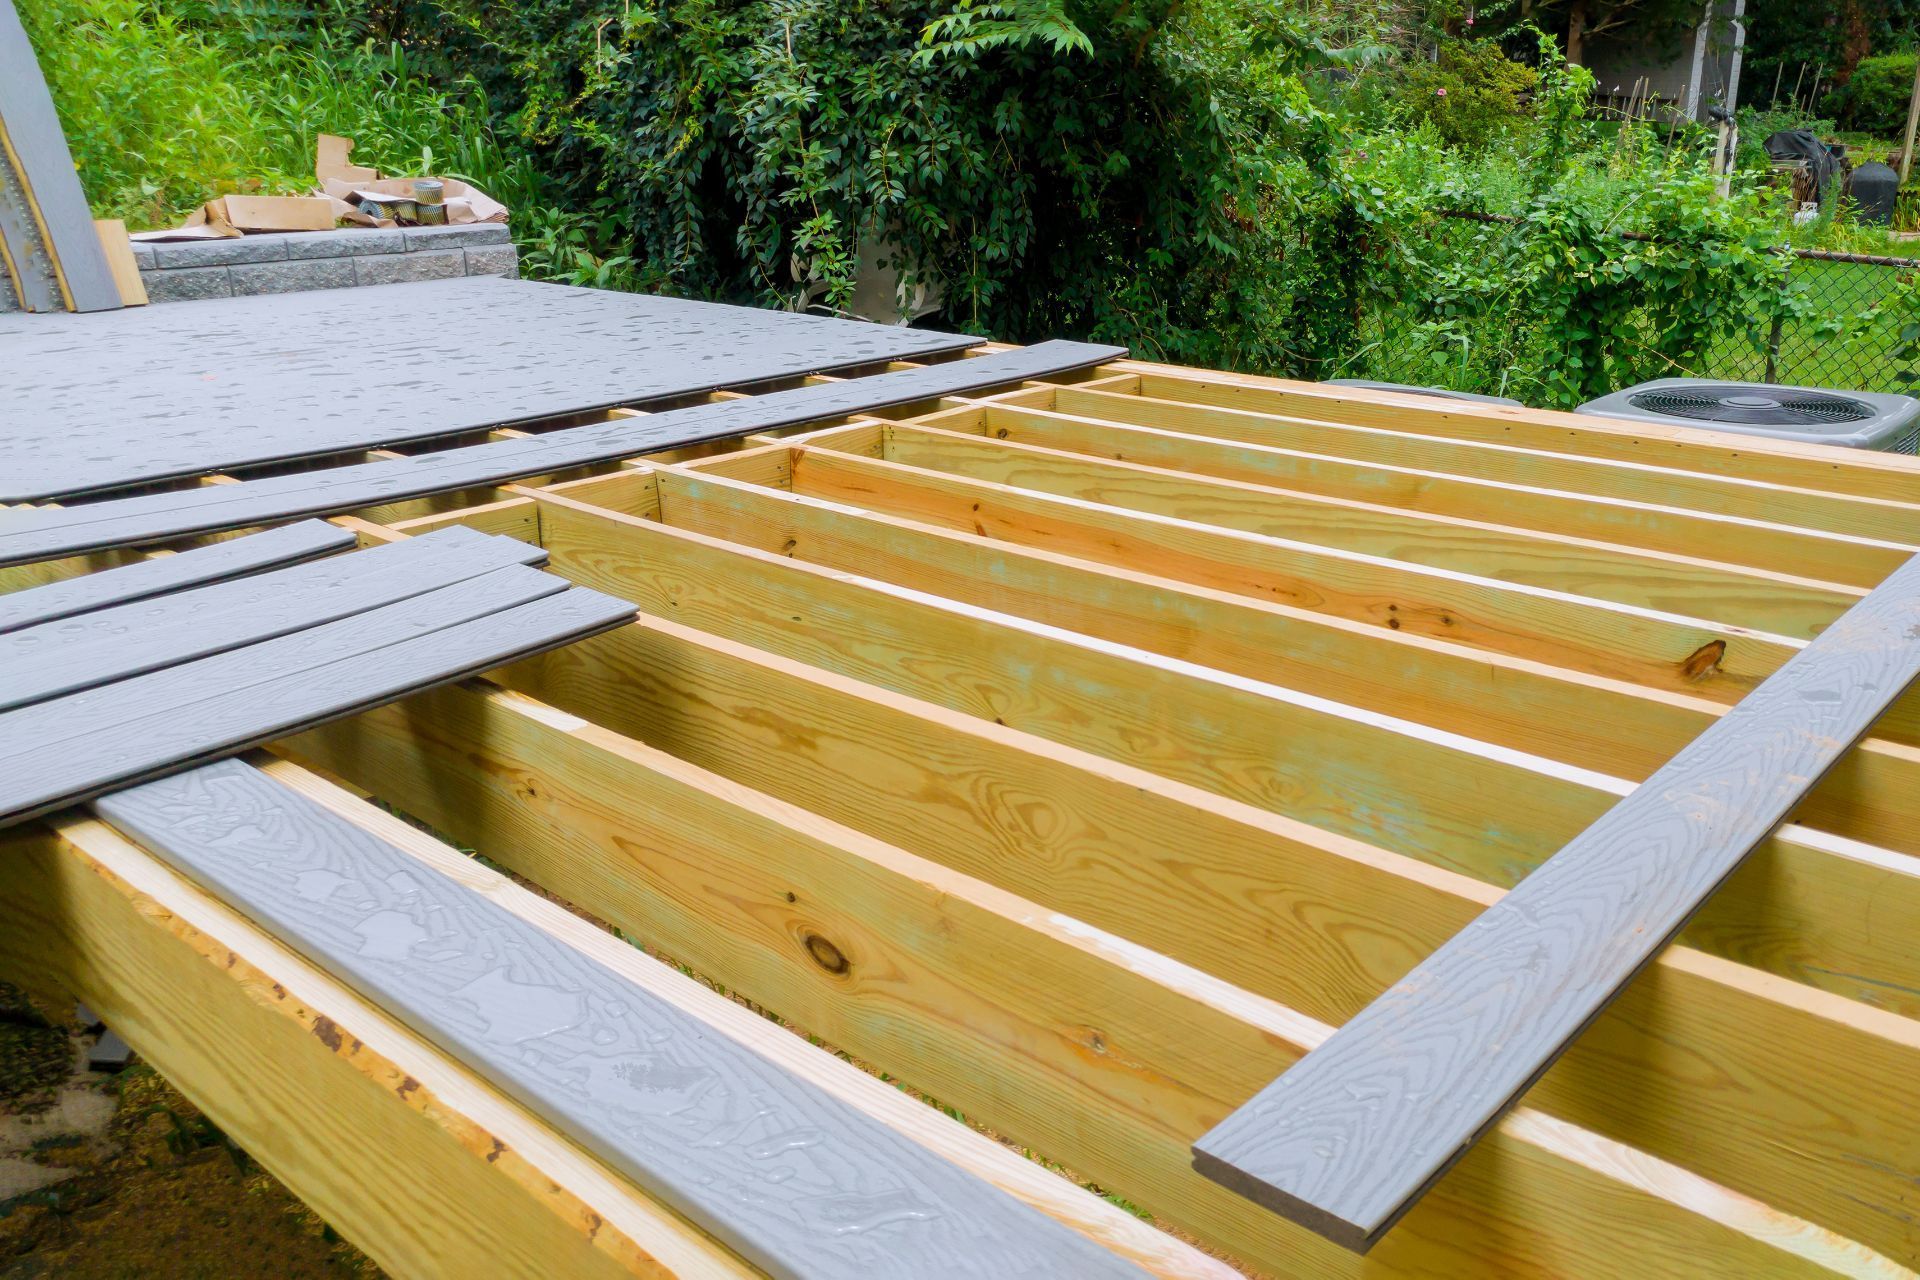 Early stage of a backyard deck construction in Henderson, Nevada, showing the framework of joists made of new, unstained pine wood. The structure is laid out against a backdrop of lush greenery, with a portion of the deck starting to be covered by gray patterned deck boards. Materials and tools are scattered around the site, indicative of an active building project.